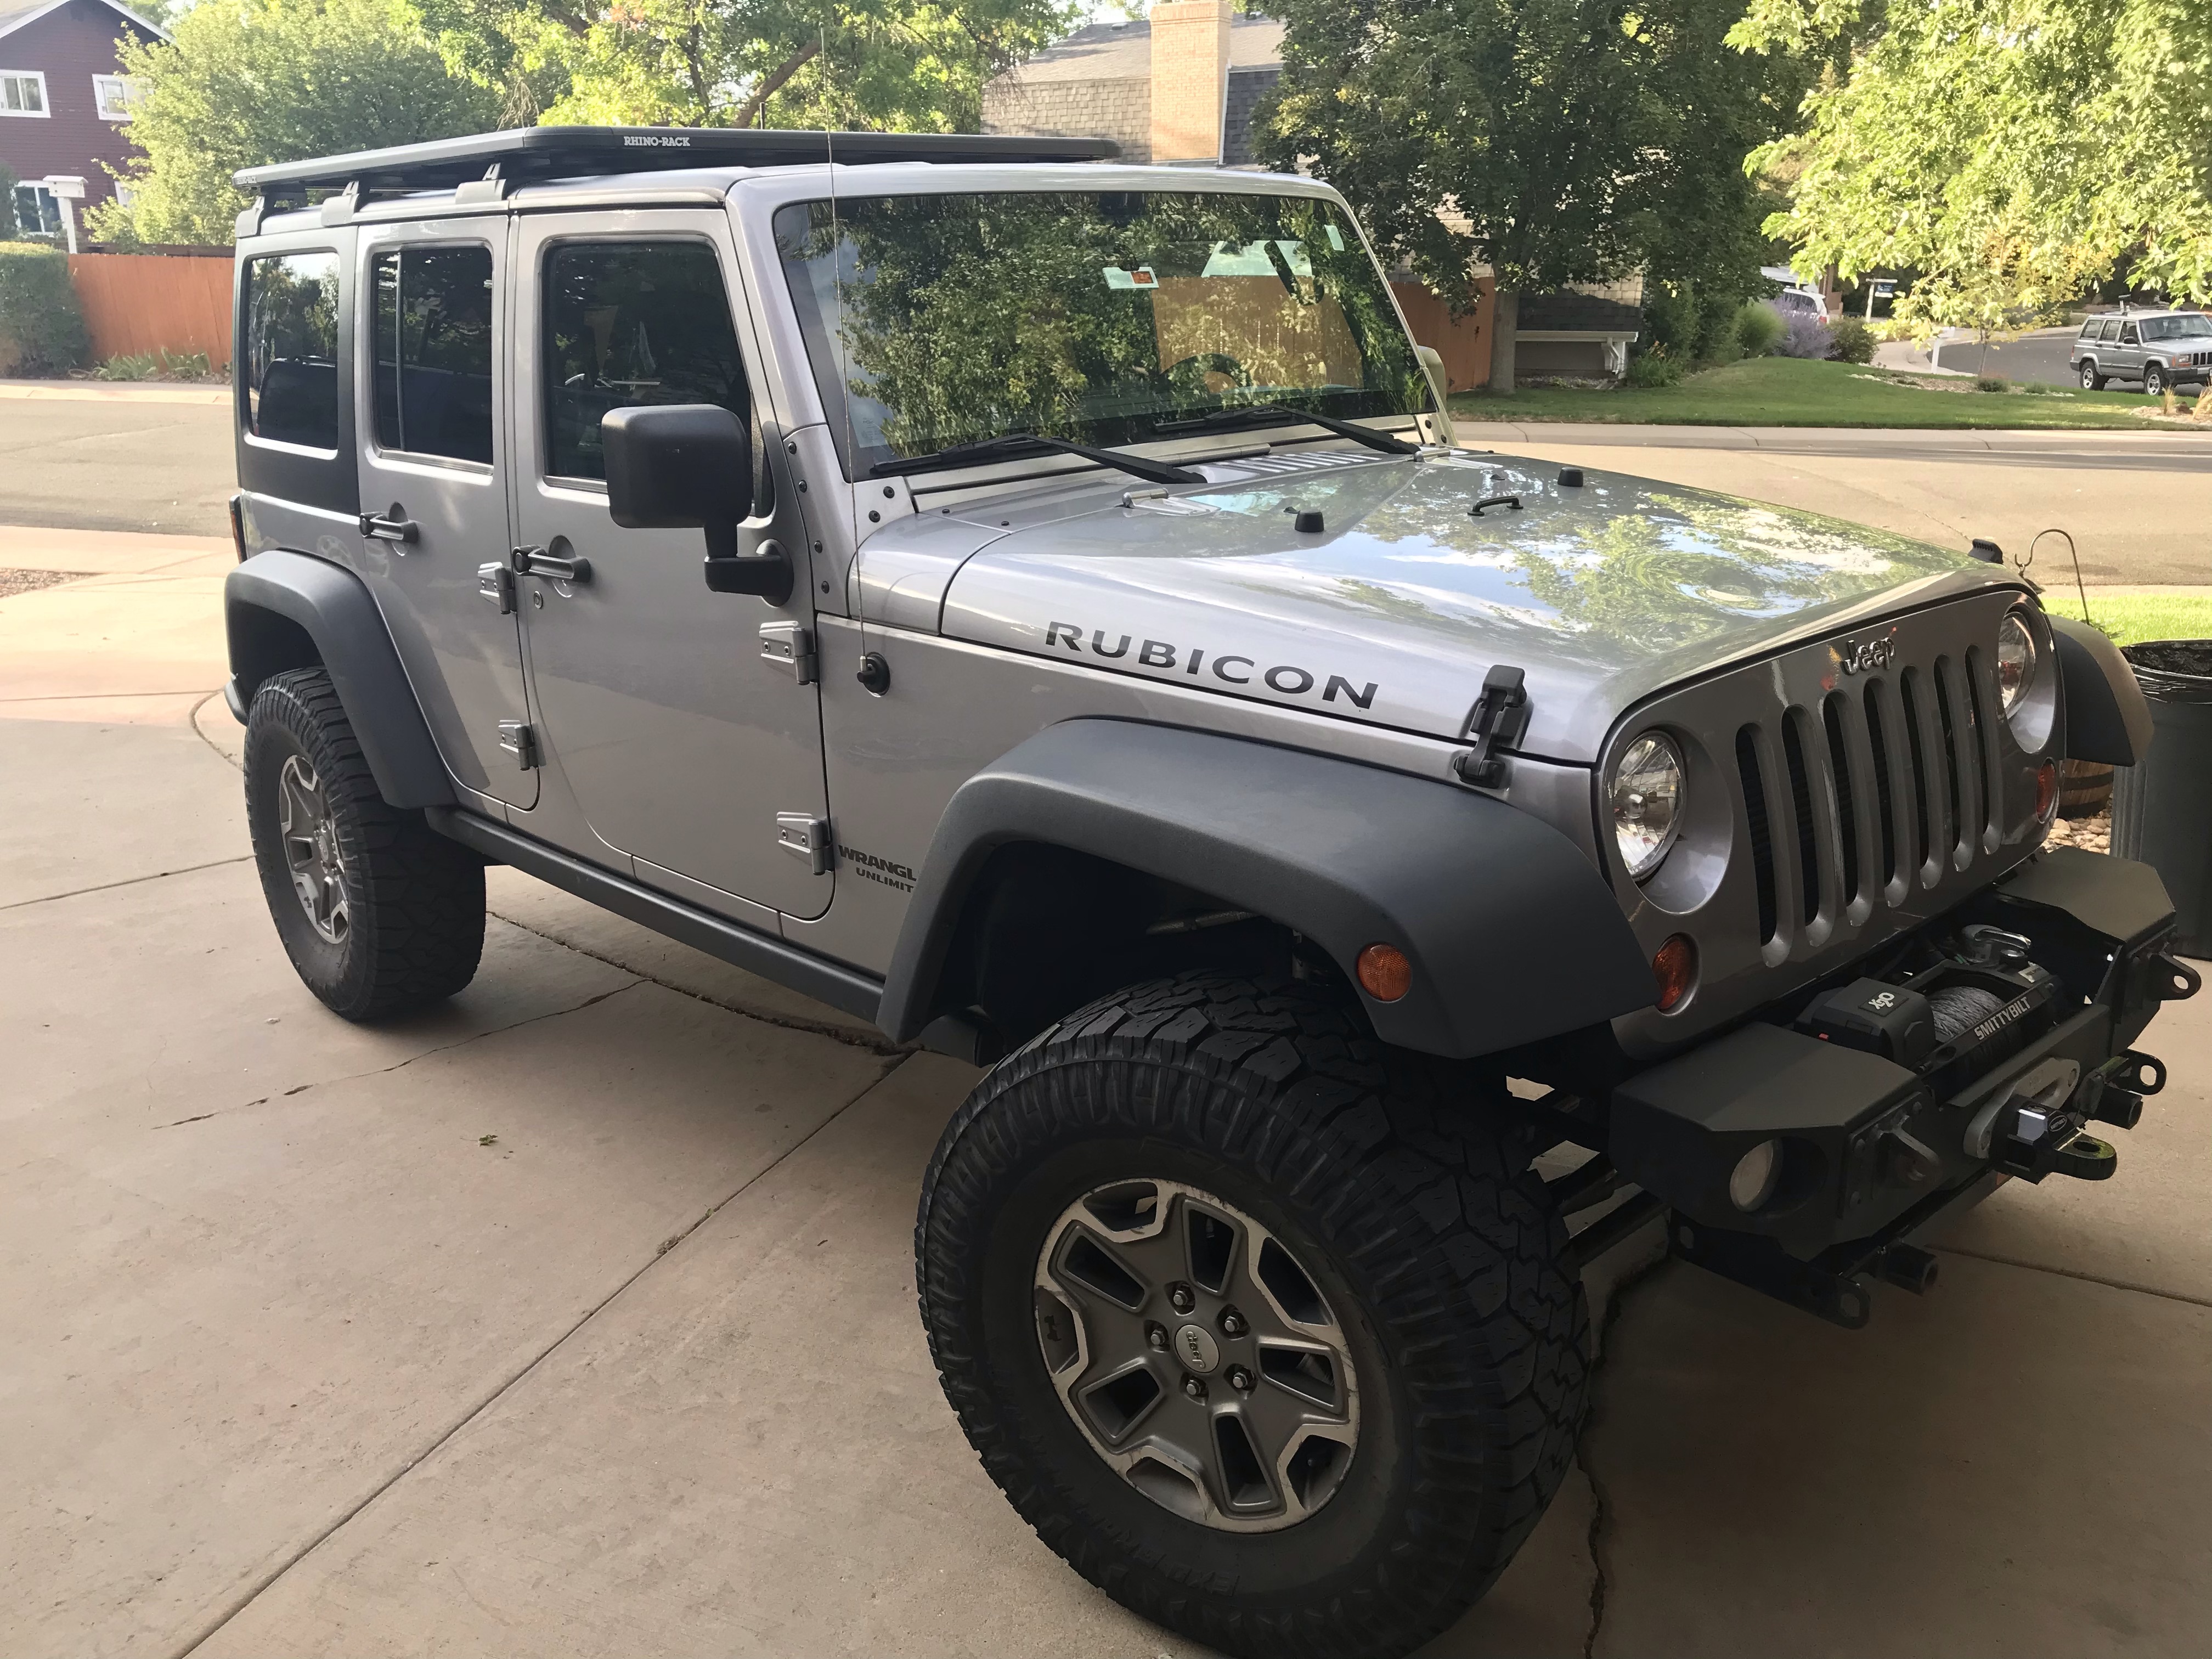 SOLD - 2013 Jeep Wrangler Unlimited Rubicon - Denver | Expedition Portal